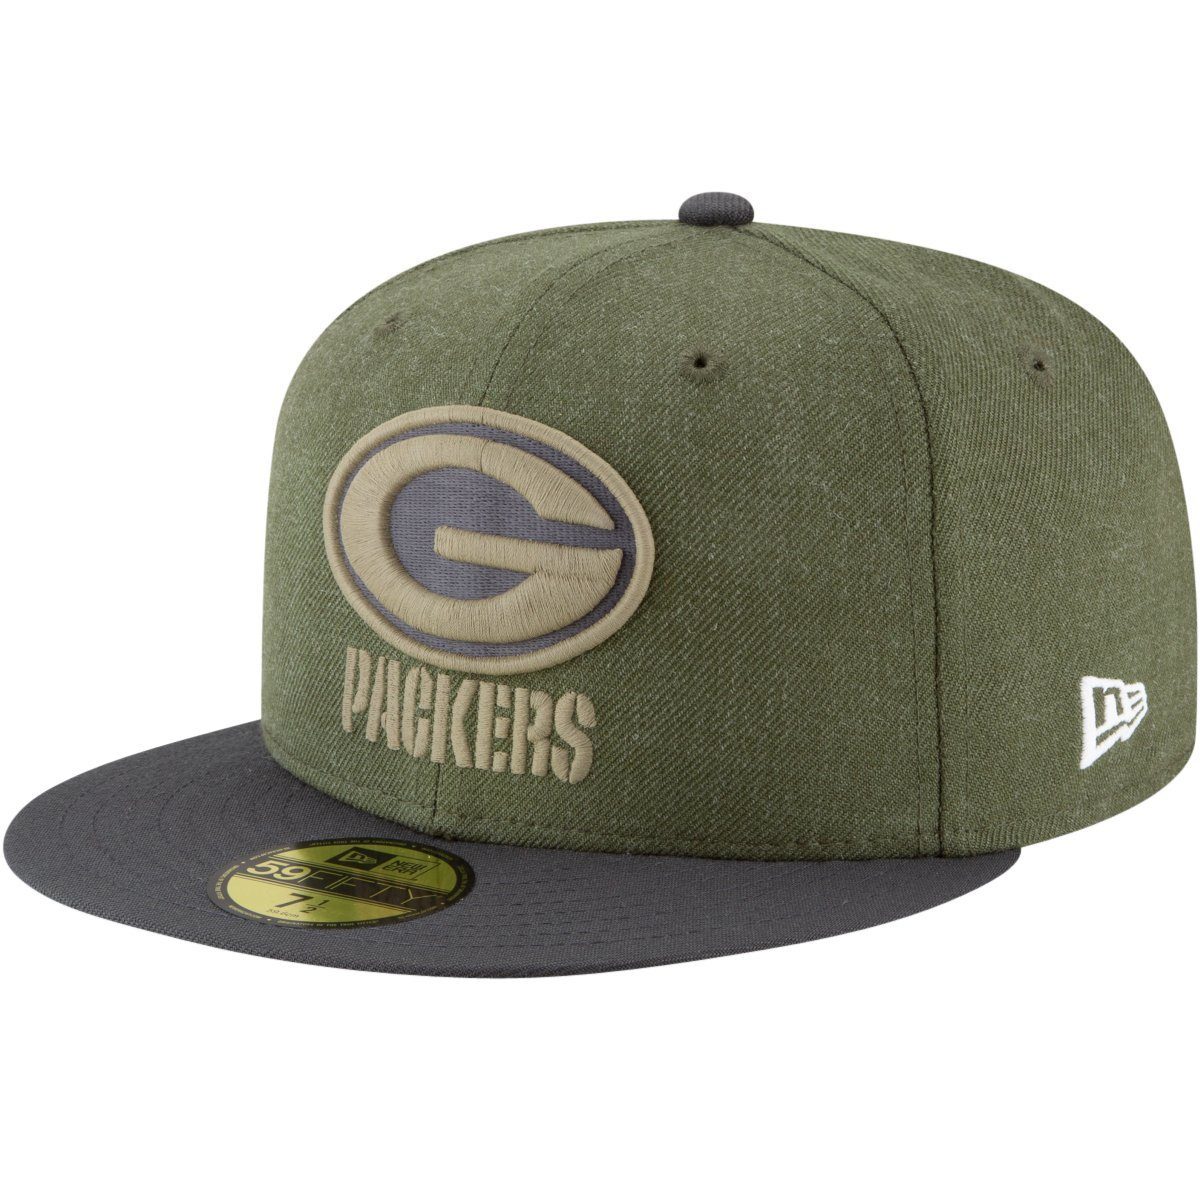 Salute Service Cap Green Bay to New NFL Packers Fitted 59Fifty Era